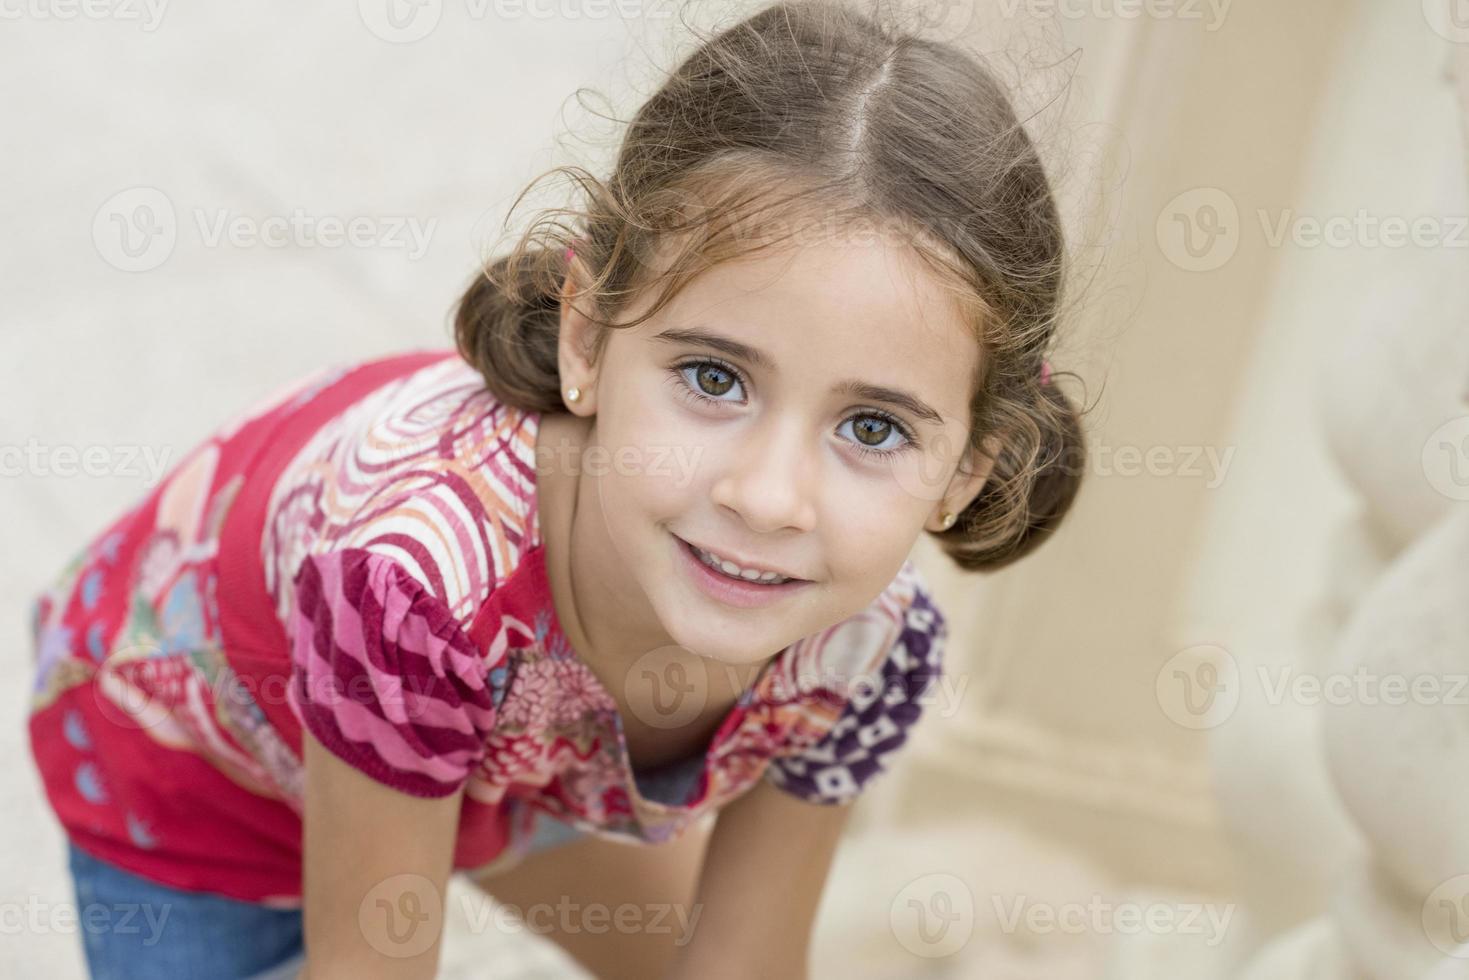 Adorable little girl combed with pigtails photo